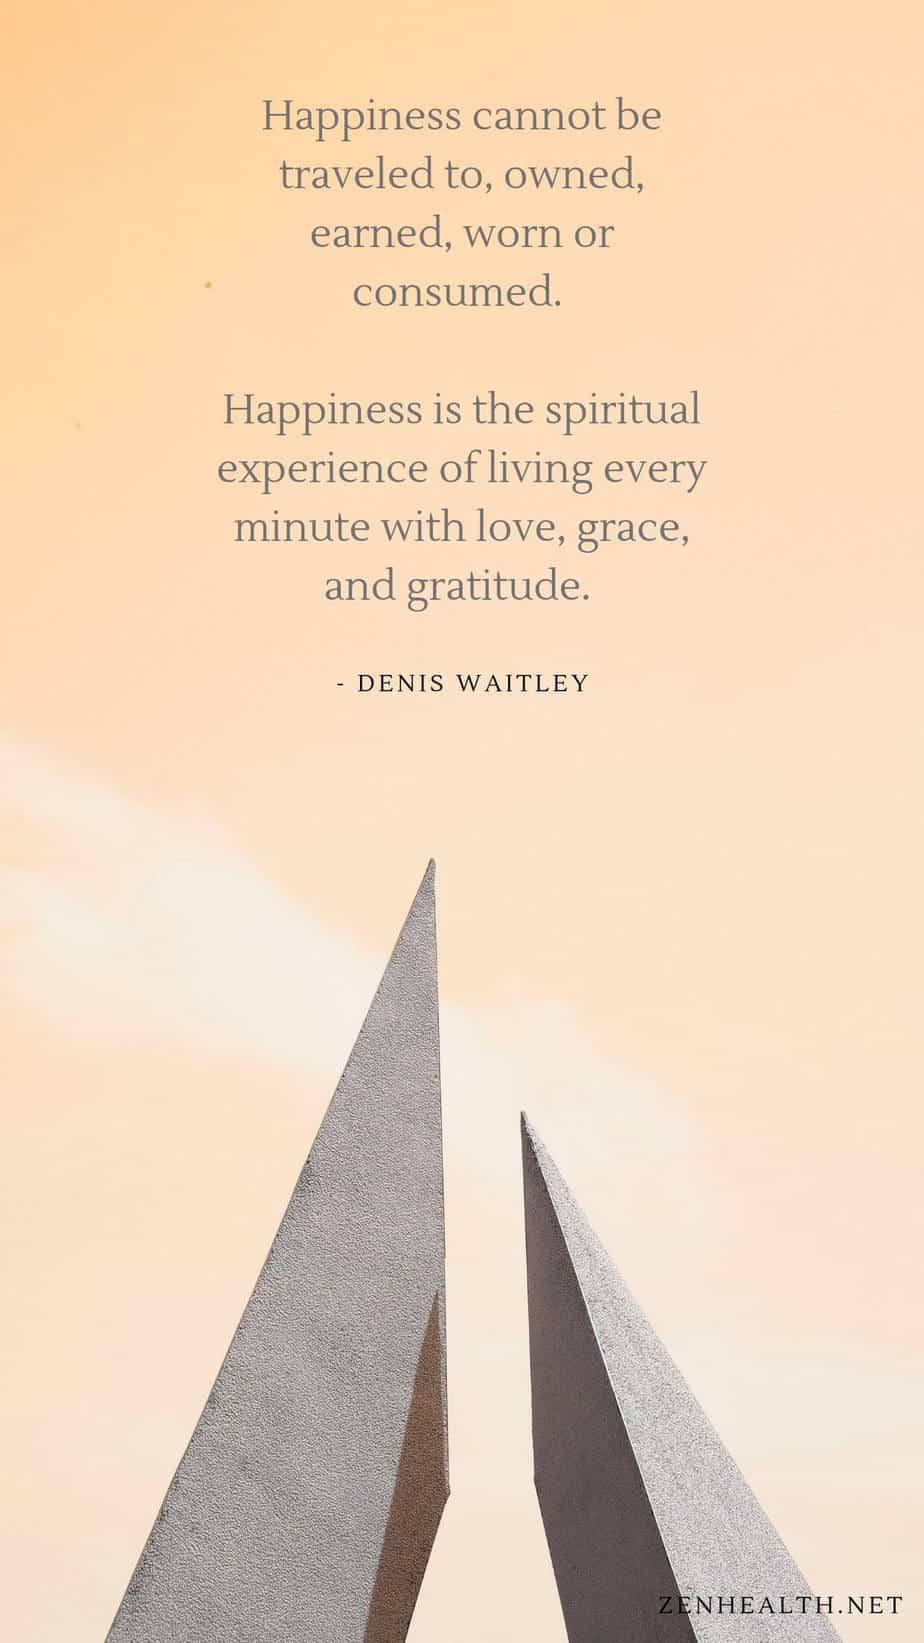 Happiness cannot be traveled to, owned, earned, worn or consumed. Happiness is the spiritual experience of living every minute with love, grace, and gratitude. - Denis Waitley